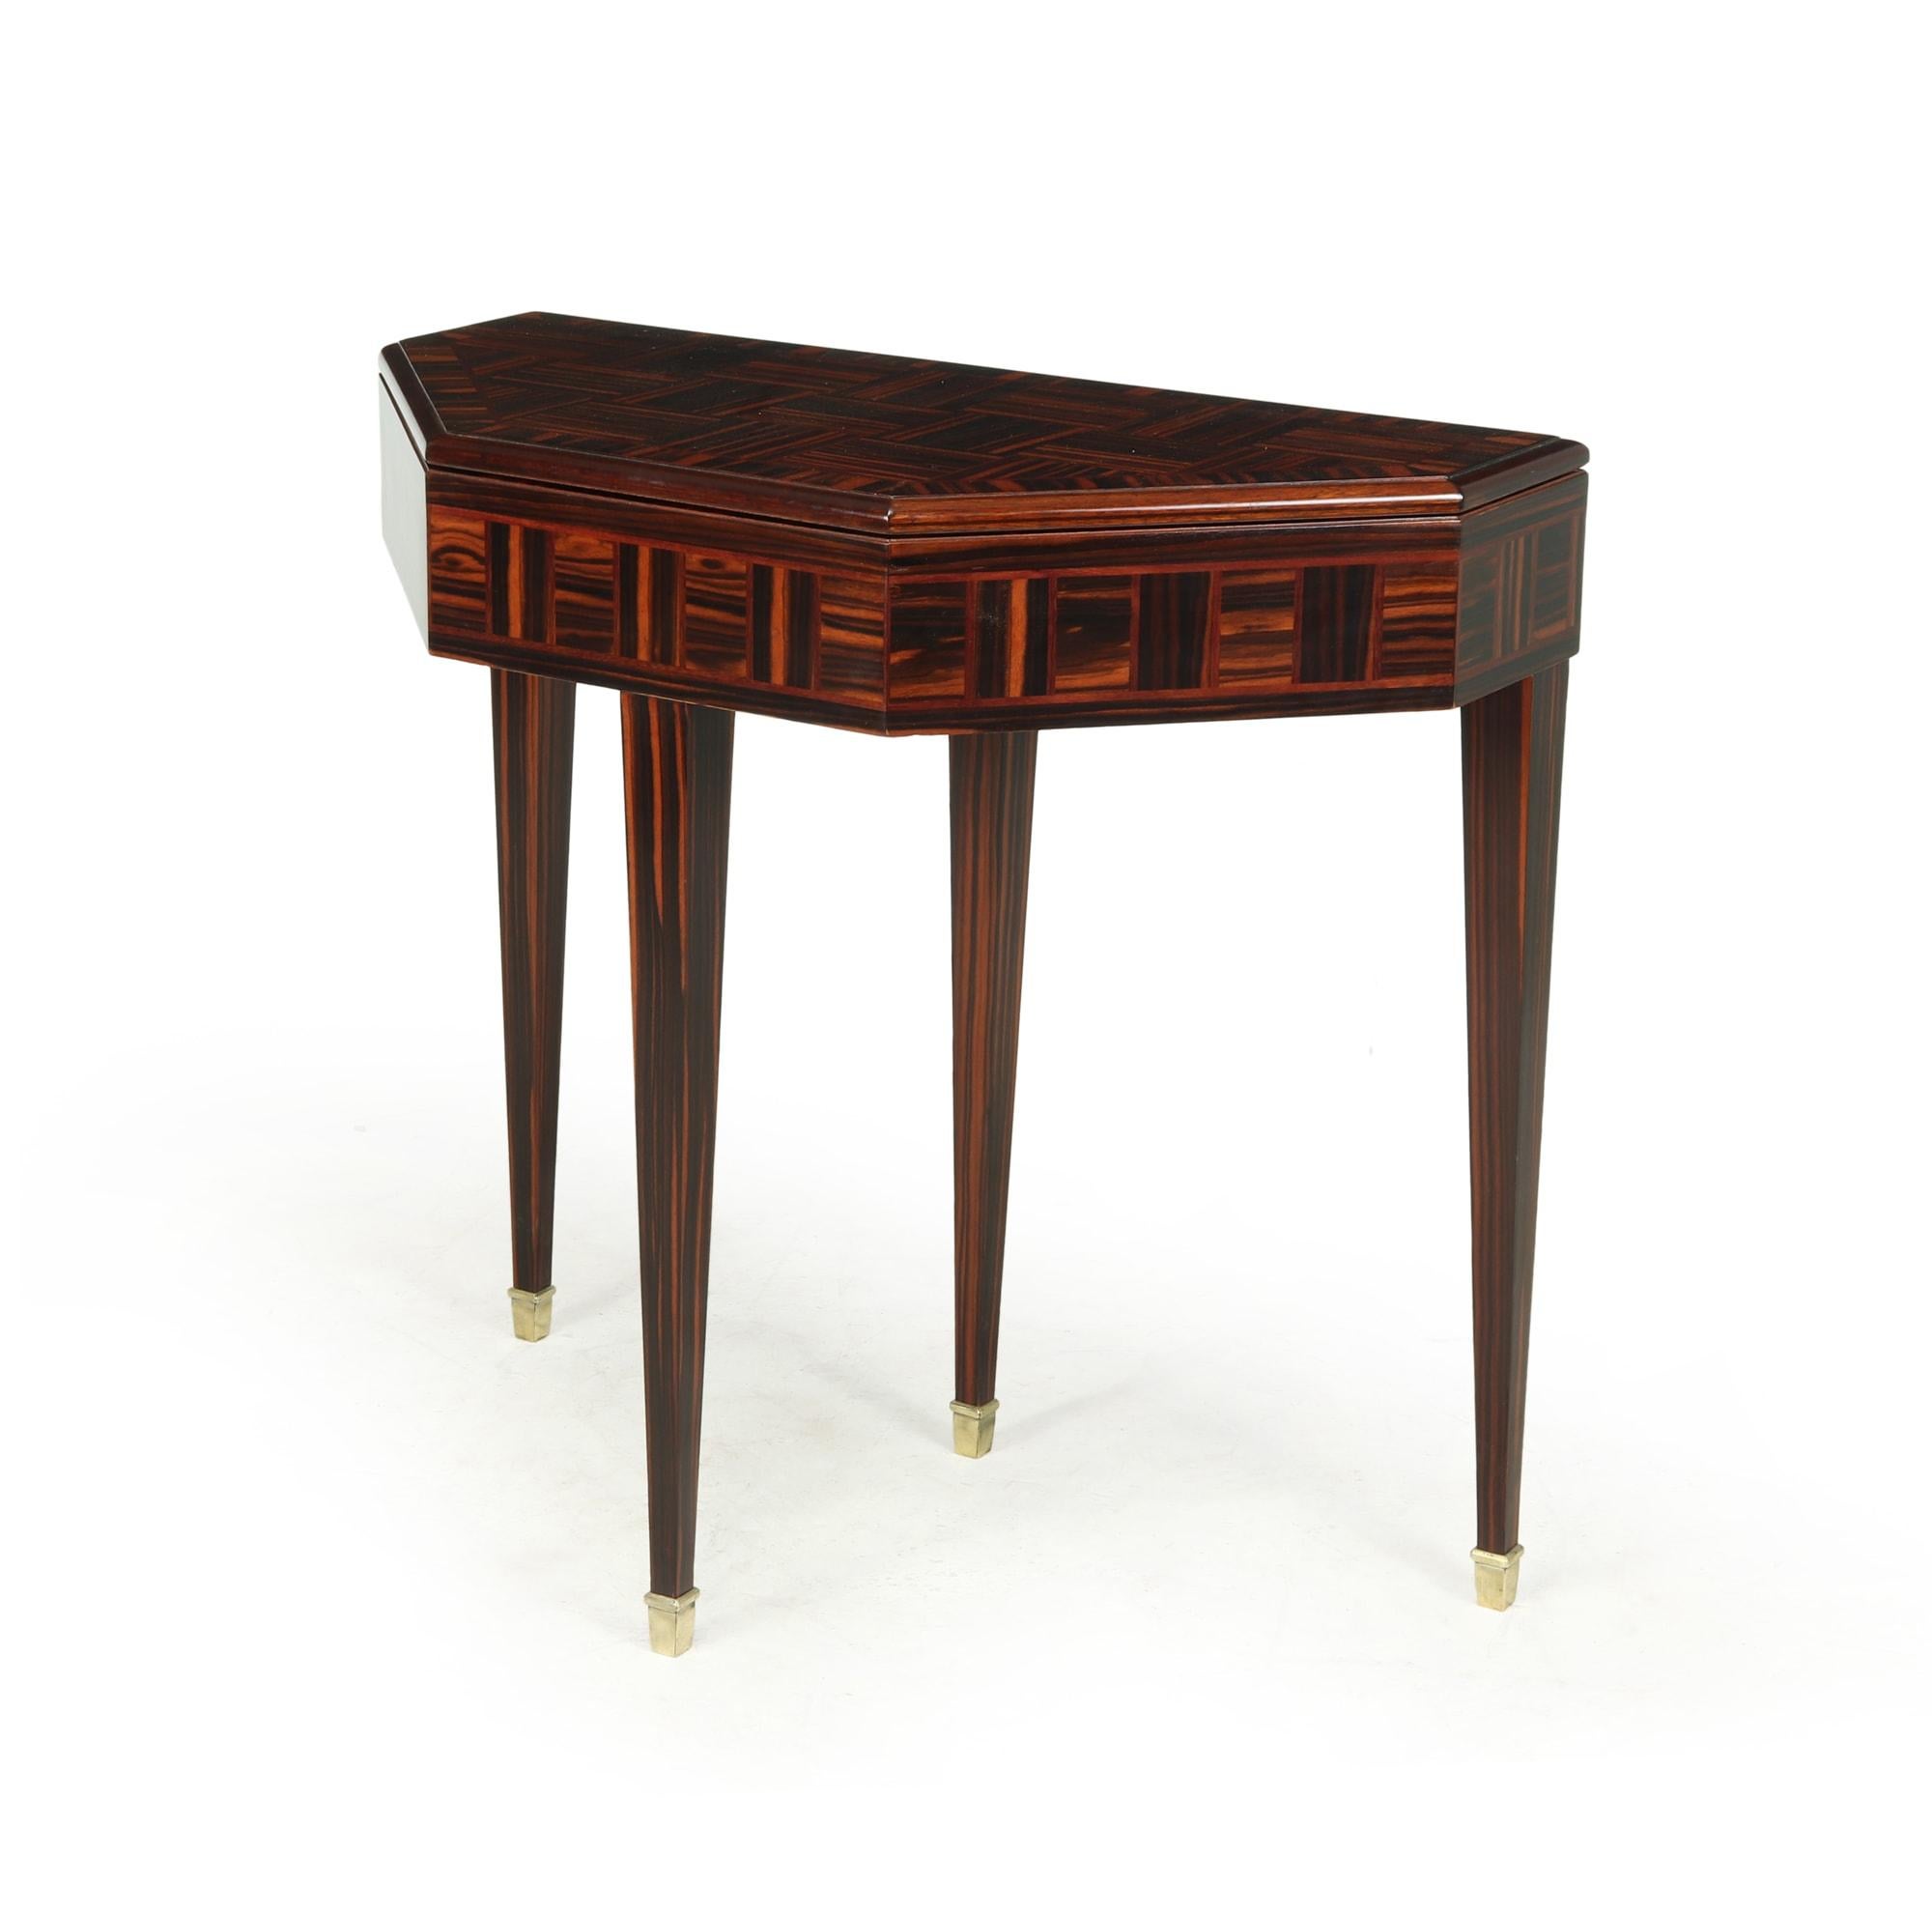 A fold over card table produced in the 1920’s in France from parquet Macassar ebony, fold over top that has been baize lined slide out drawer and support on four tapered square legs terminating with brass sabots.

The table has been fully polished